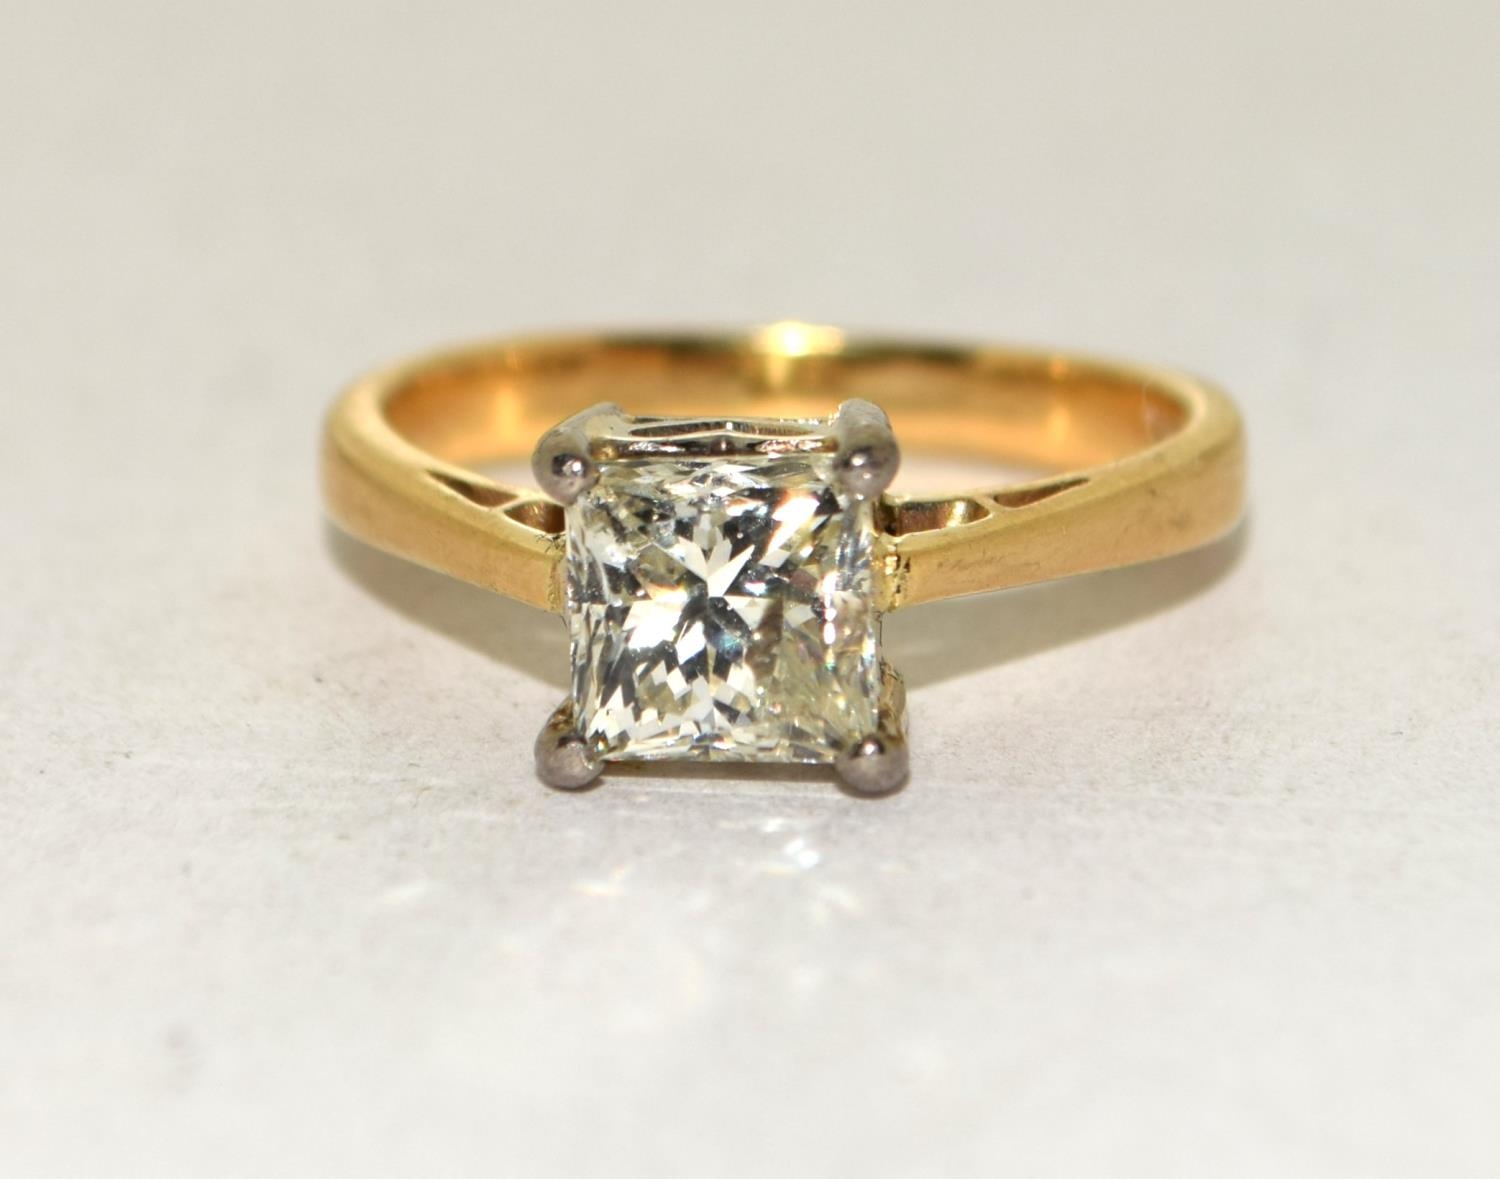 Superb 18ct yellow gold ladies Diamond solitaire ring set as a Princess Cut Diamond of approx 1.